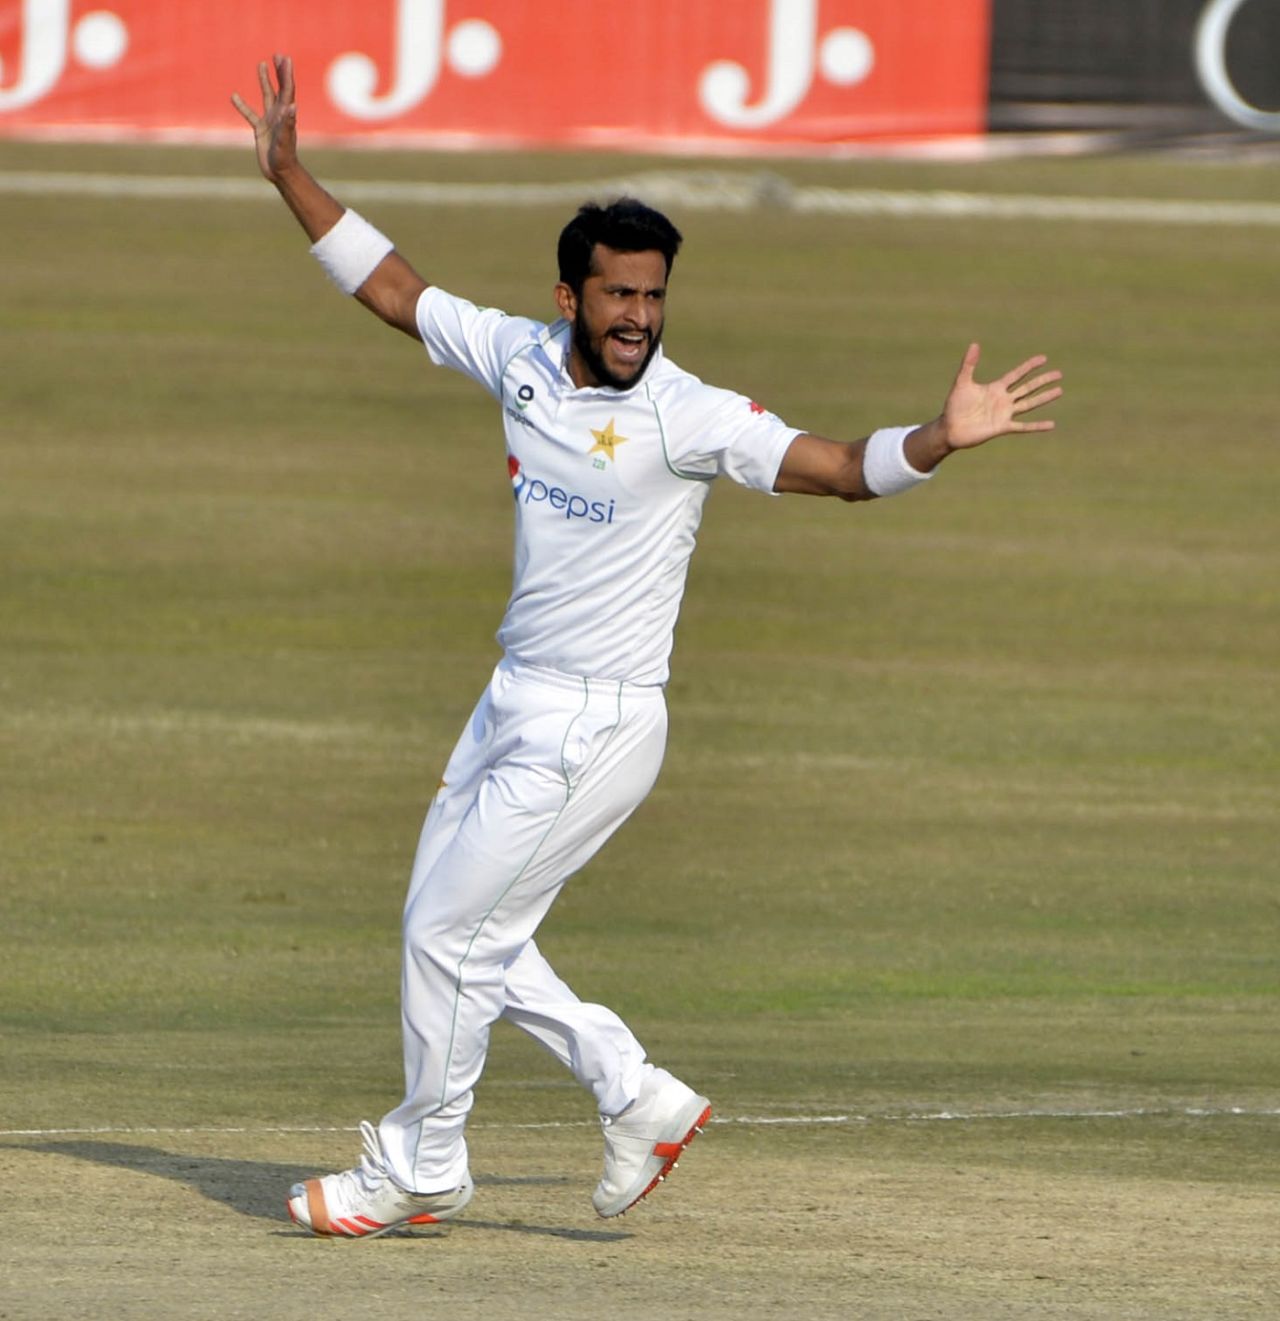 Hasan Ali goes up in appeal, Pakistan vs South Africa, 2nd Test, Rawalpindi, 2nd day, February 5, 2021